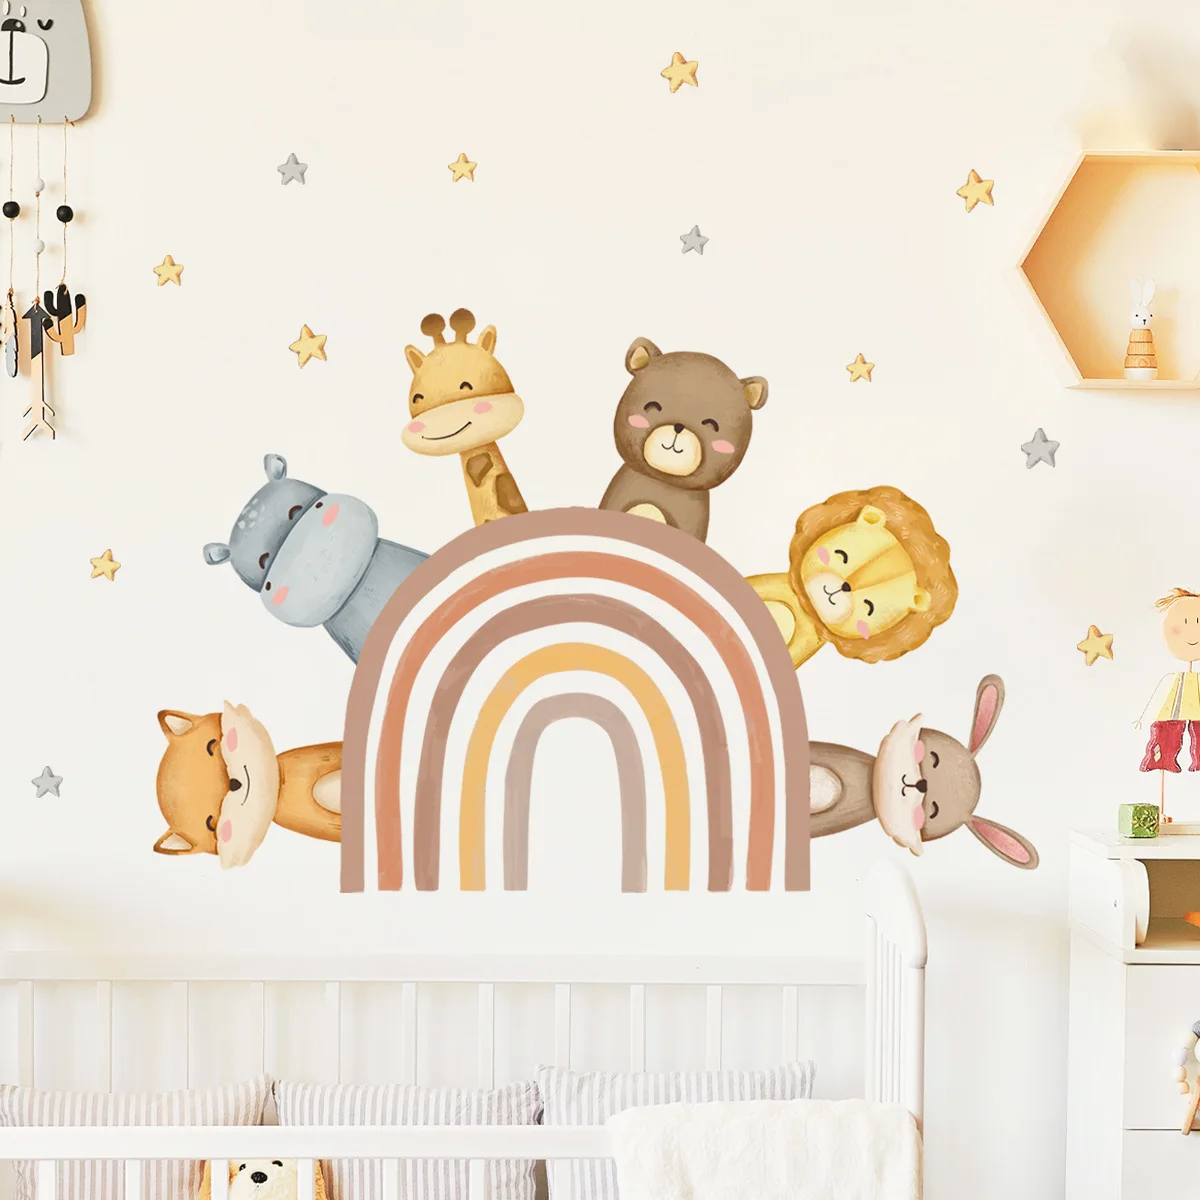 2pcs Cartoon Animal Rainbow Star Wall Sticker Children's Room Living Room Bedroom Study Restaurant Decoration Mural Wall Sticker 2pcs baby hair clips butterfly hairpin for girls lace hairclip children embroidery pins kawaii accessories barette kids headwear